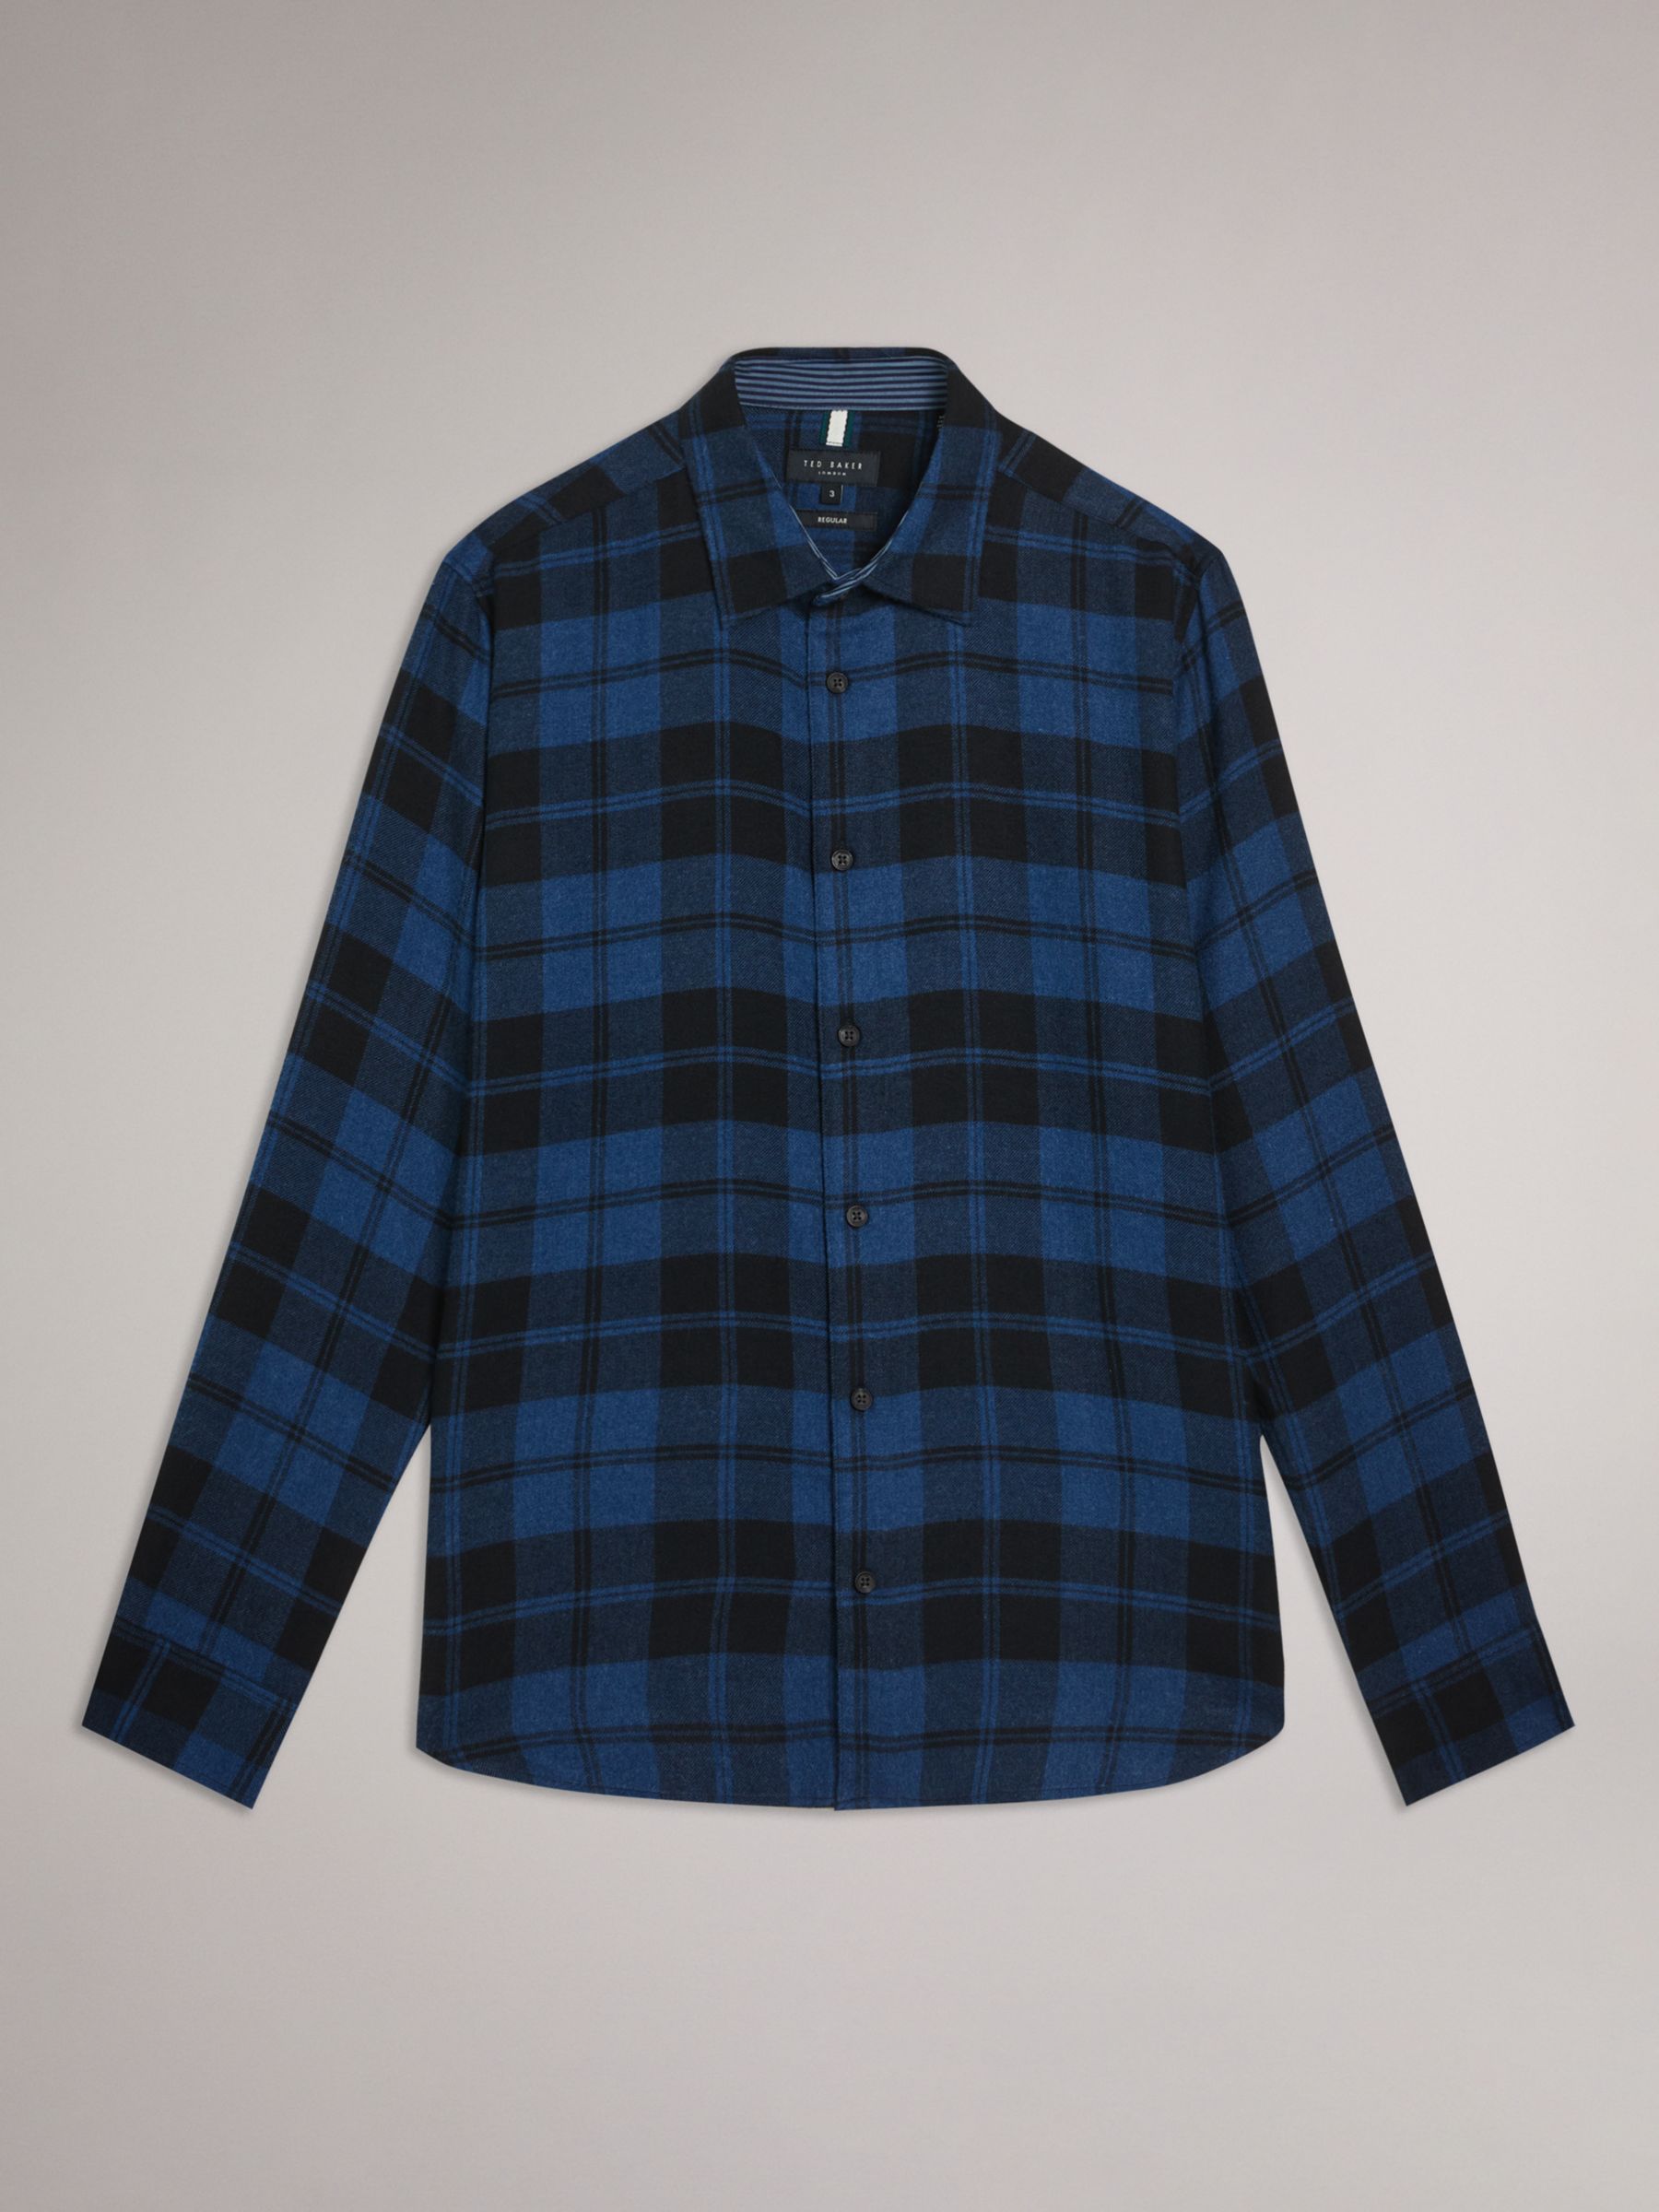 Ted Baker Abacus Long Sleeve Check Flannel Shirt, Navy/Multi, XS